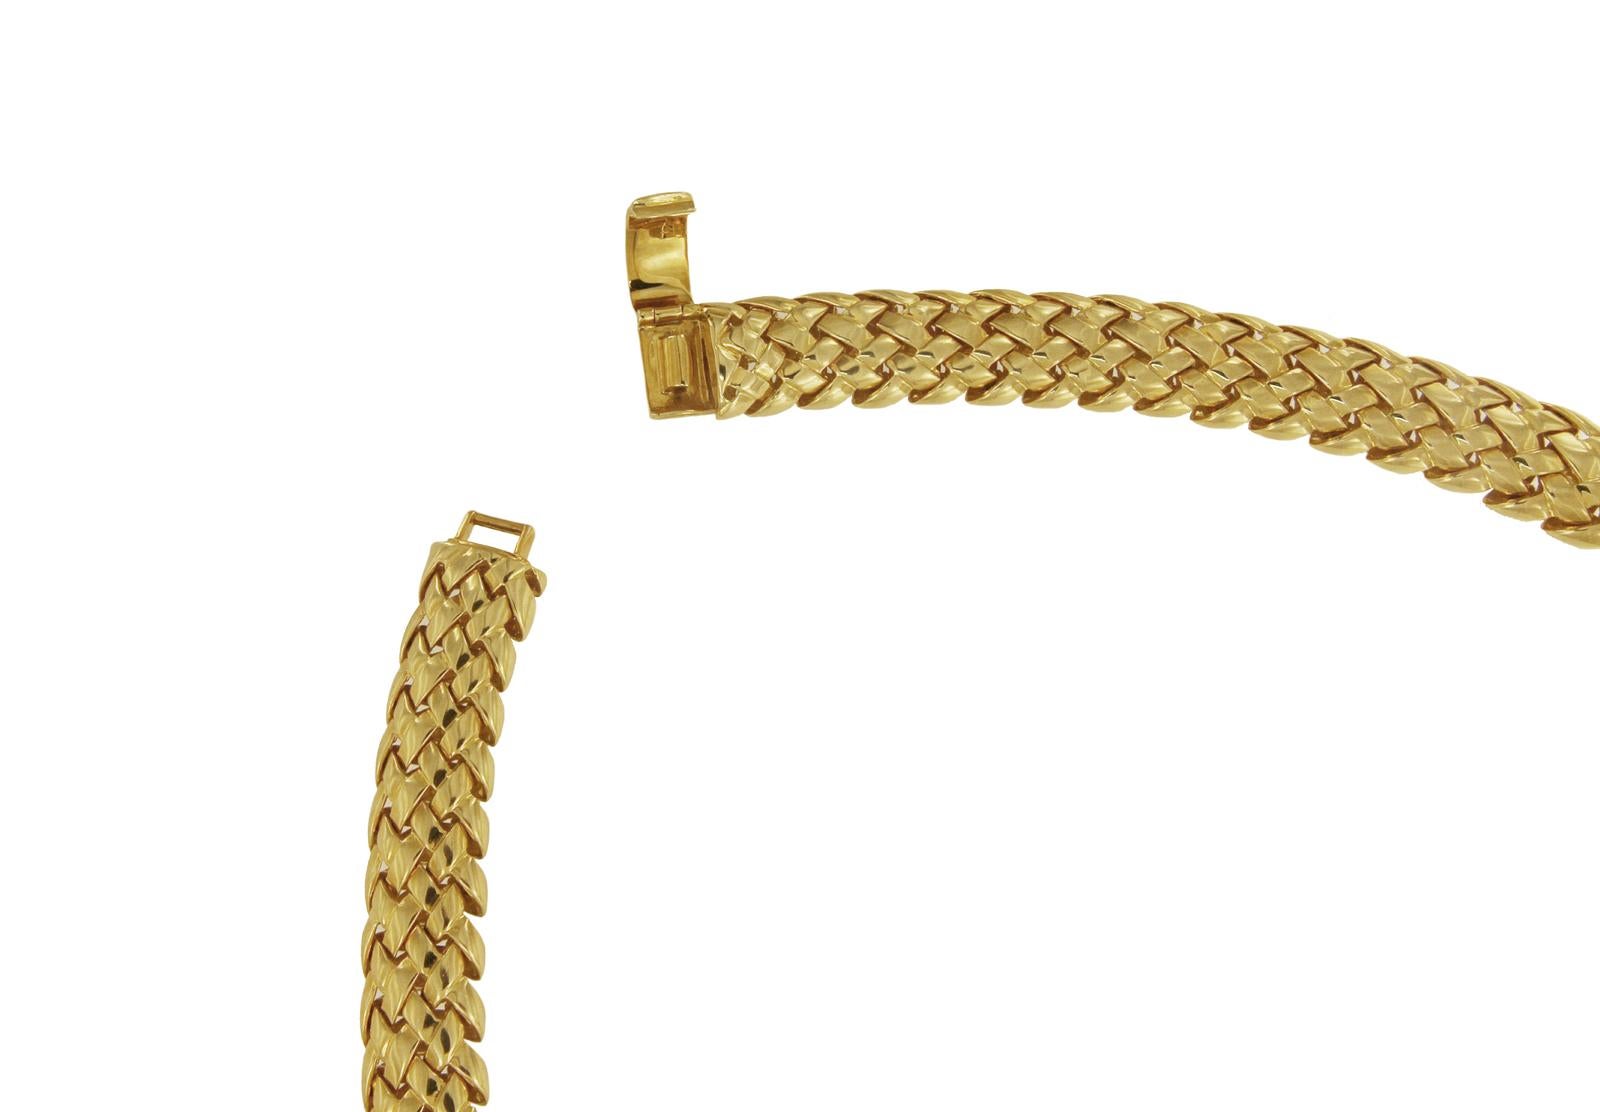 TIFFANY & CO. 18K YELLOW GOLD VANNERIE BASKET WEAVE CHOKER NECKLACE.

Mint condition
18k Yellow Gold
Length: 17”
Weight: 113.3gr
Width: 12 mm
*Comes with Tiffany box.